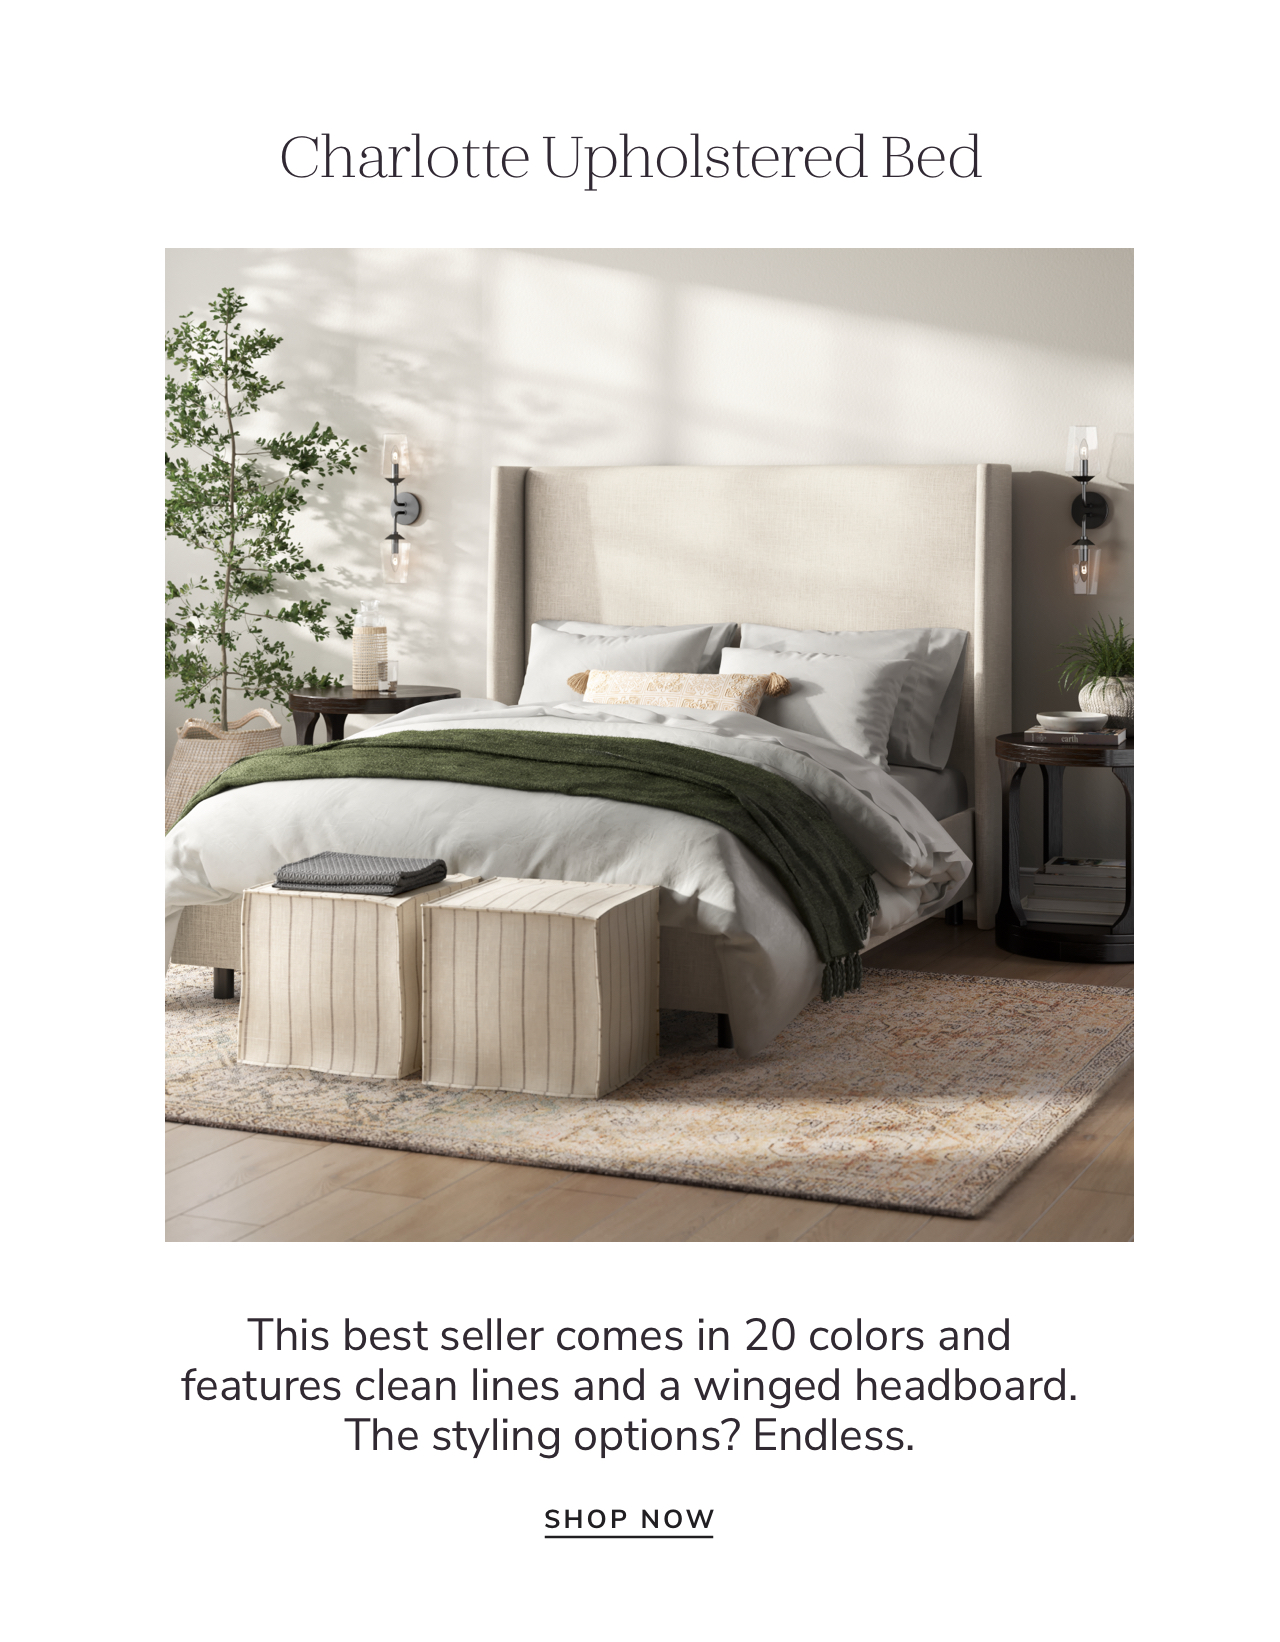 Charlotte Upholstered Bed This best seller comes in 20 colors and features clean lines and a winged headboard. The styling options? Endless. SHOP NOW 